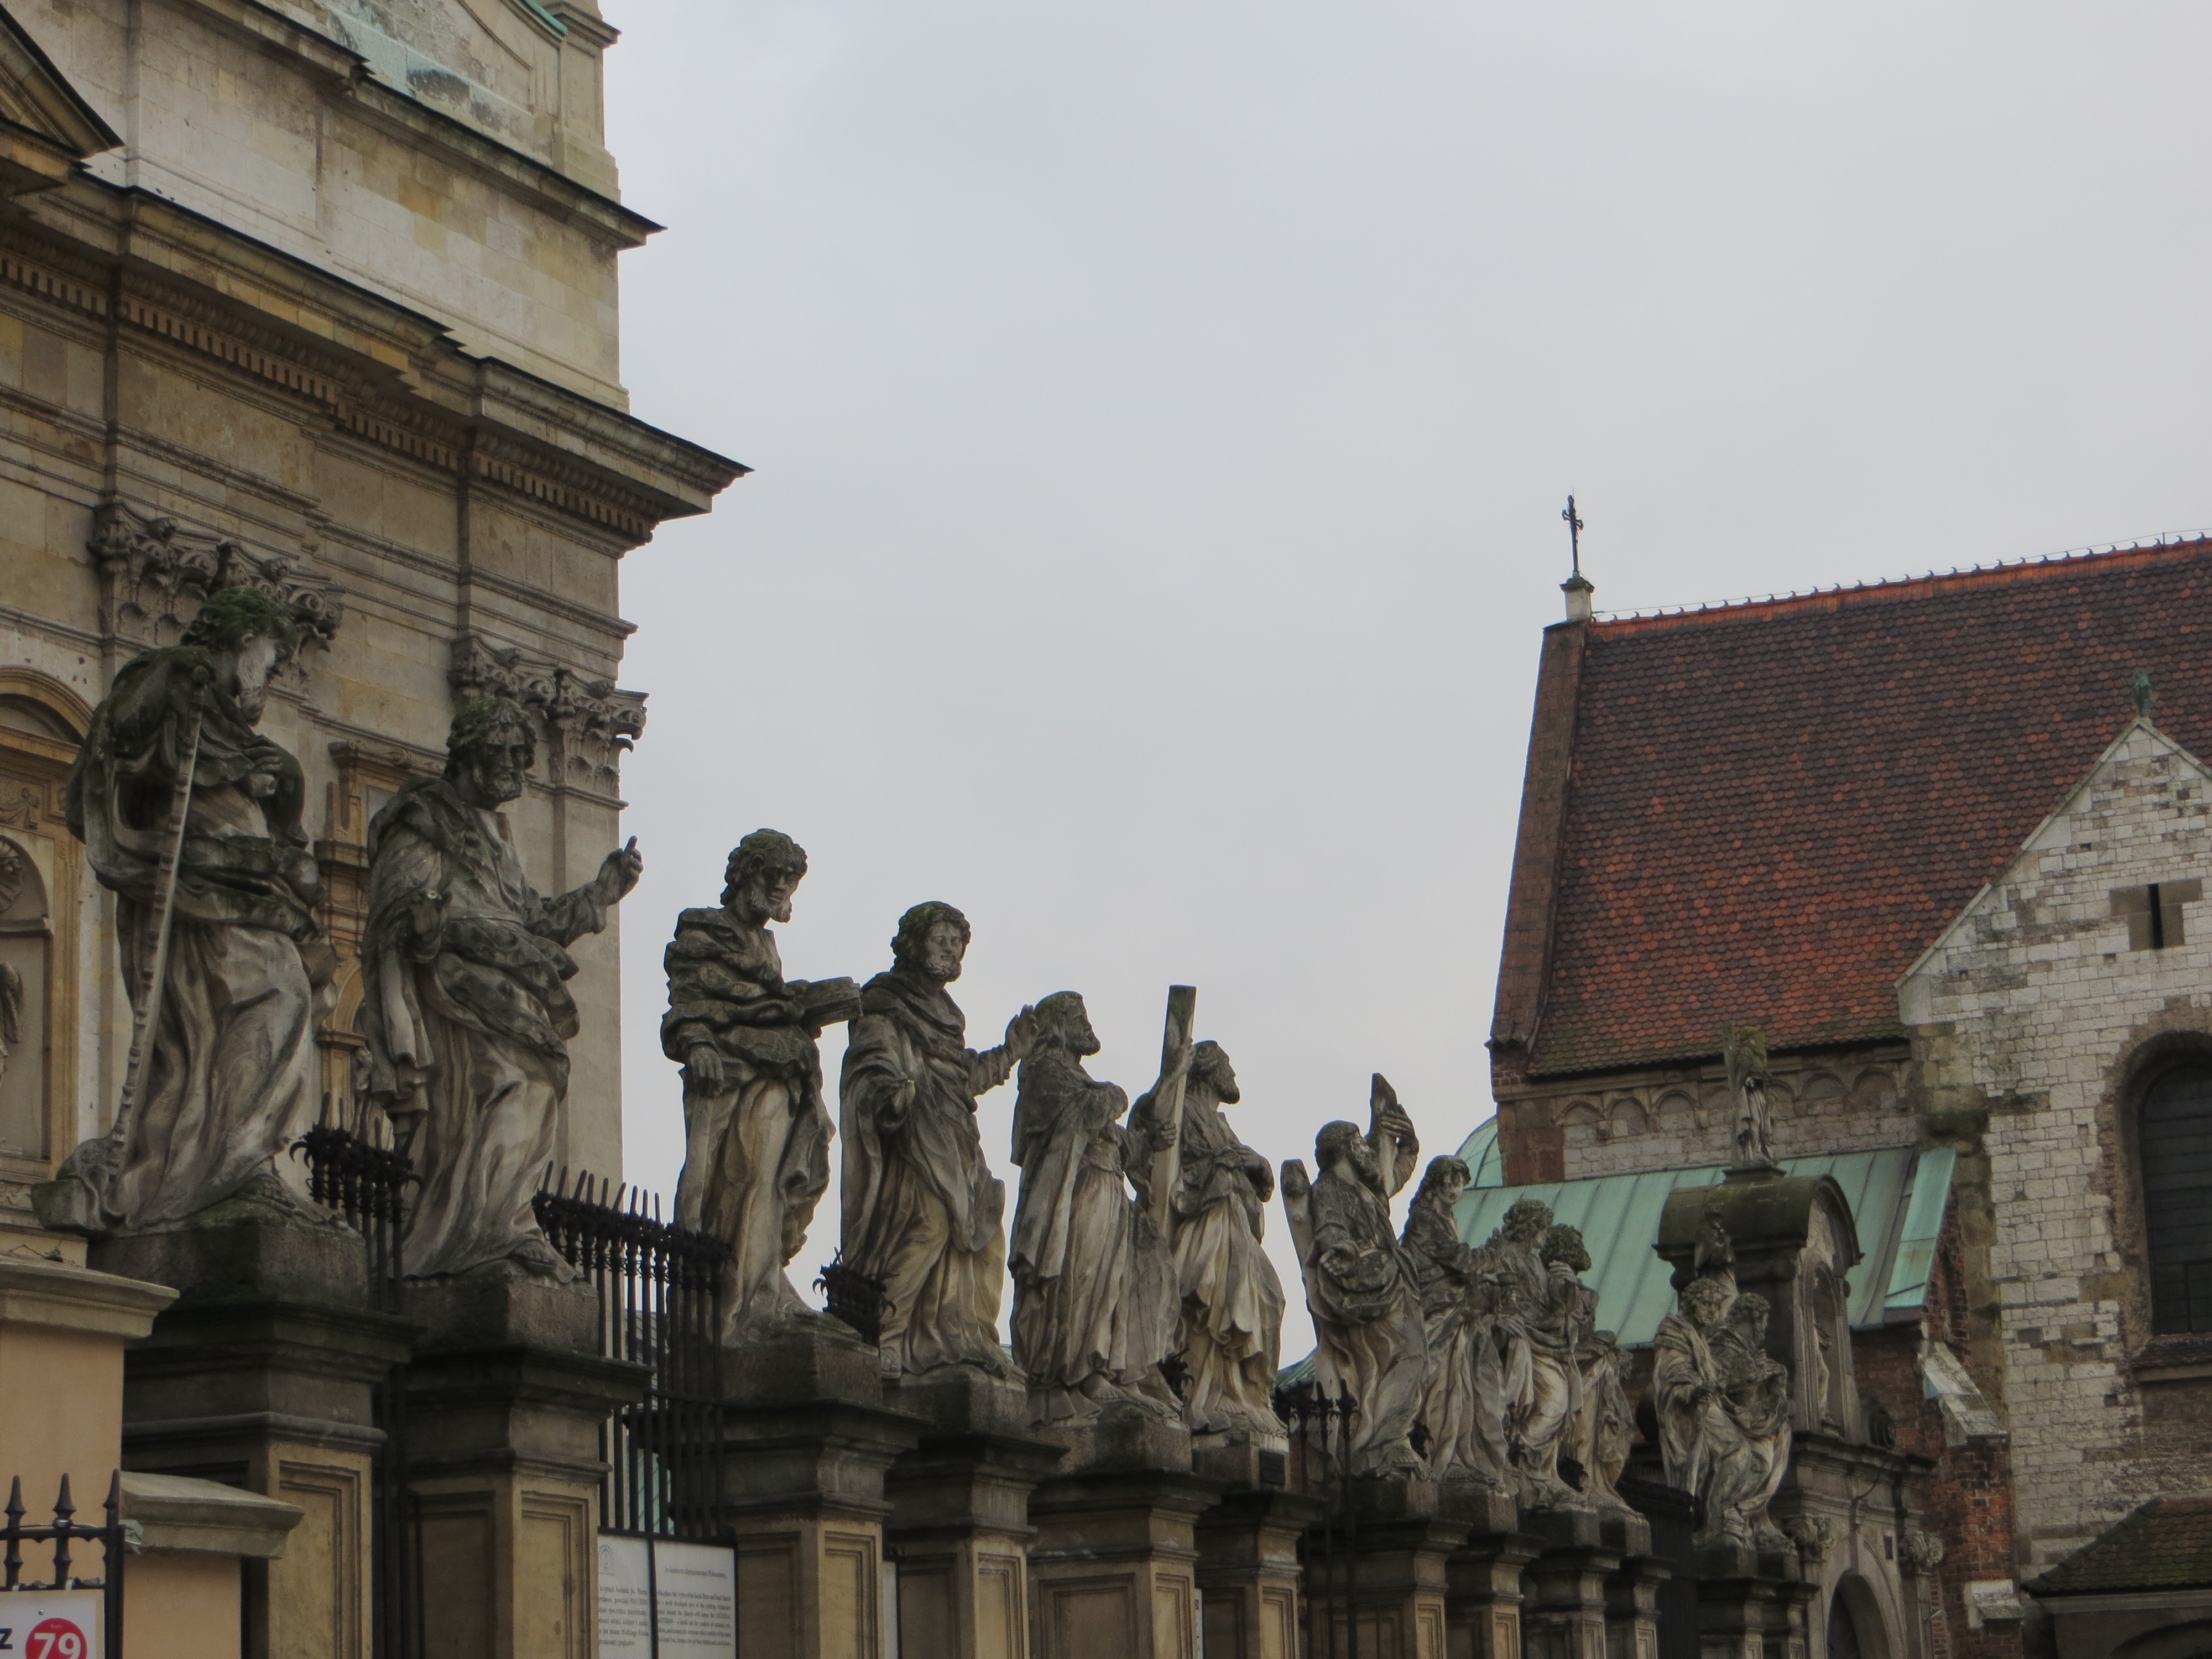 group of people standing statues